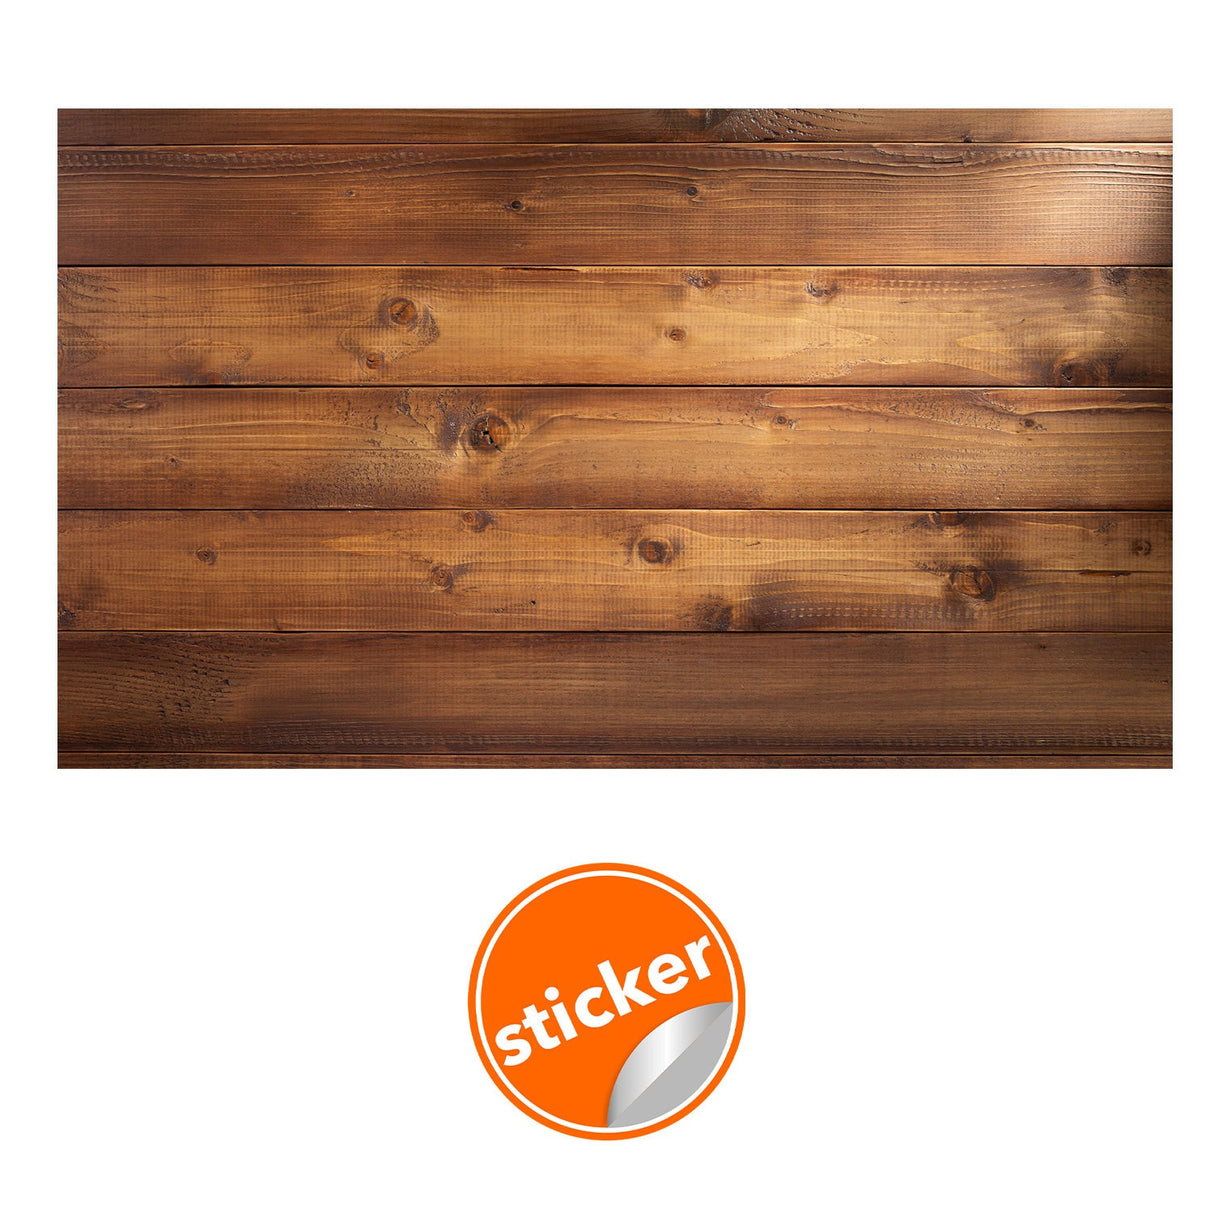 Wallpaper Wood Effect Self Adhesive Vinyl Stickers - Brown Sticky Panel For Bedroom Living Room Kitchen Wooden Peel Stick Wall Sticker Art